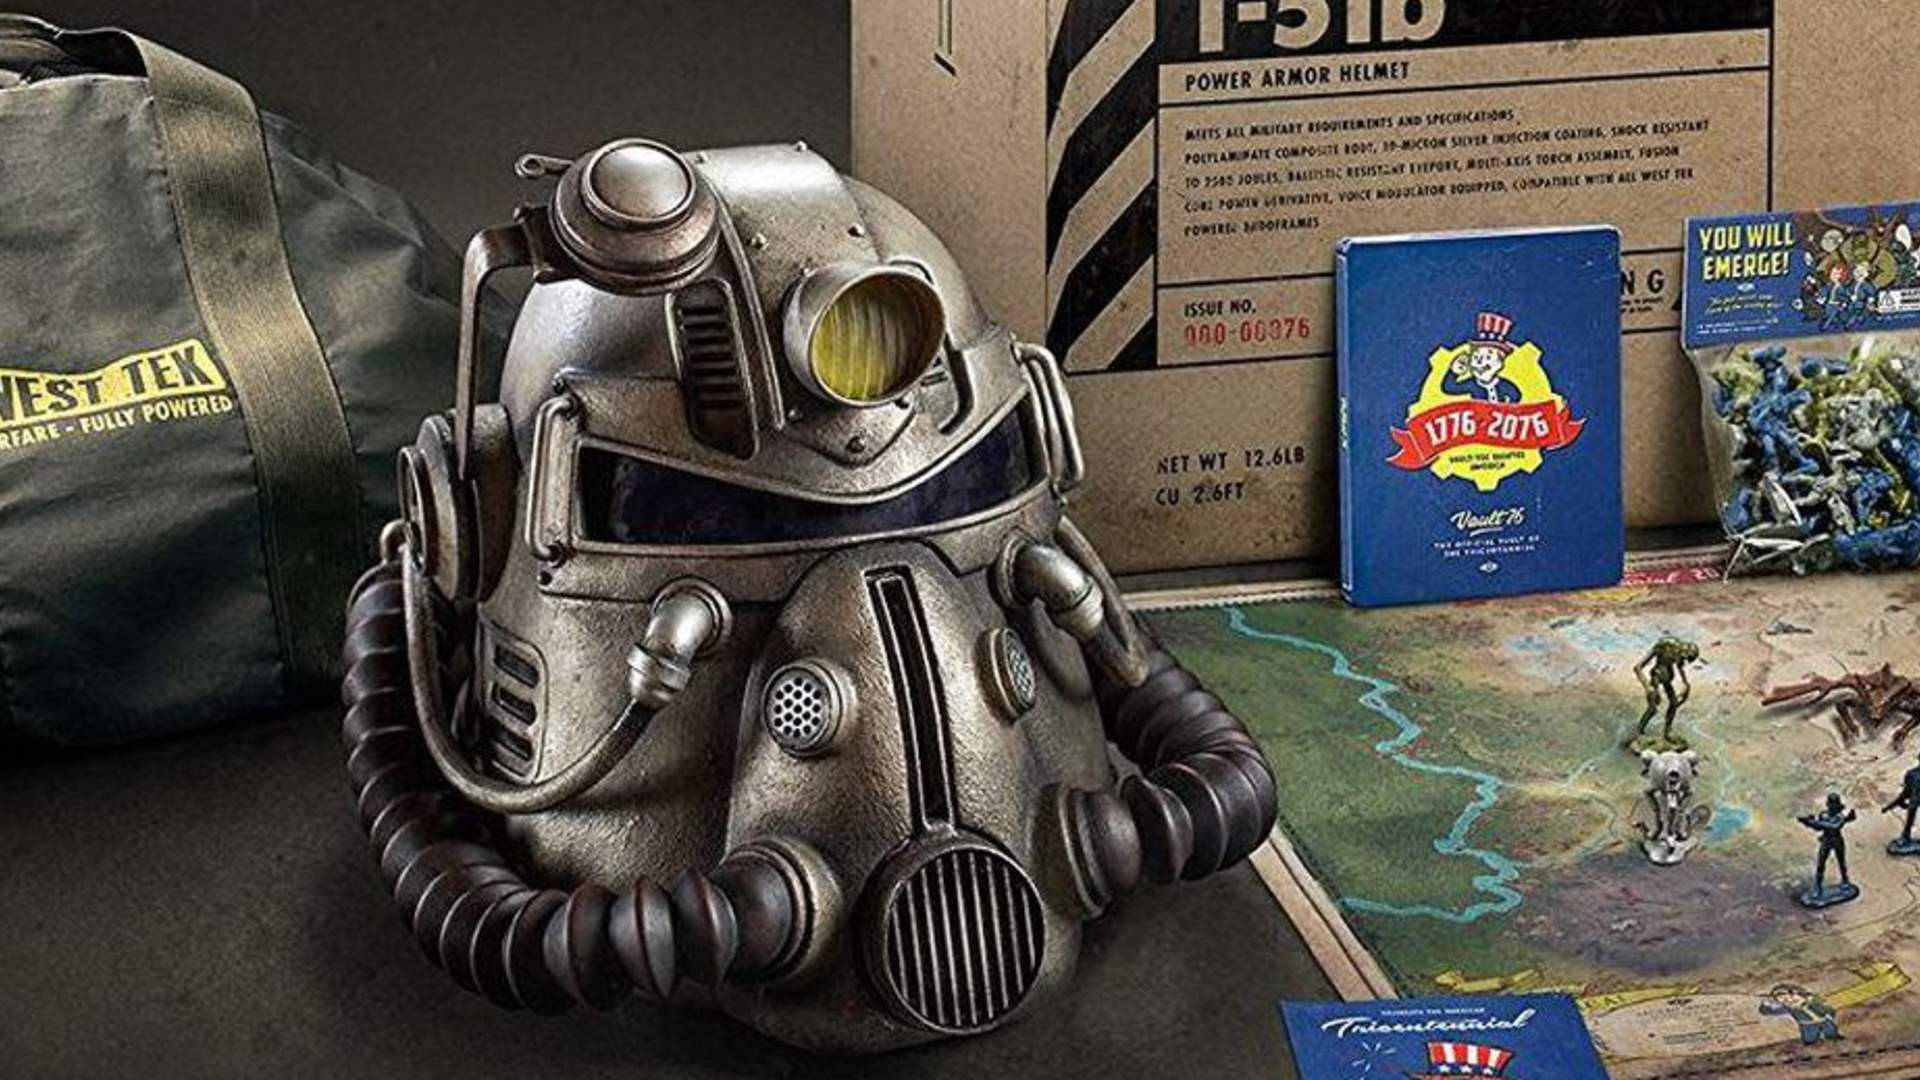 Fallout 76 Helmet In Table